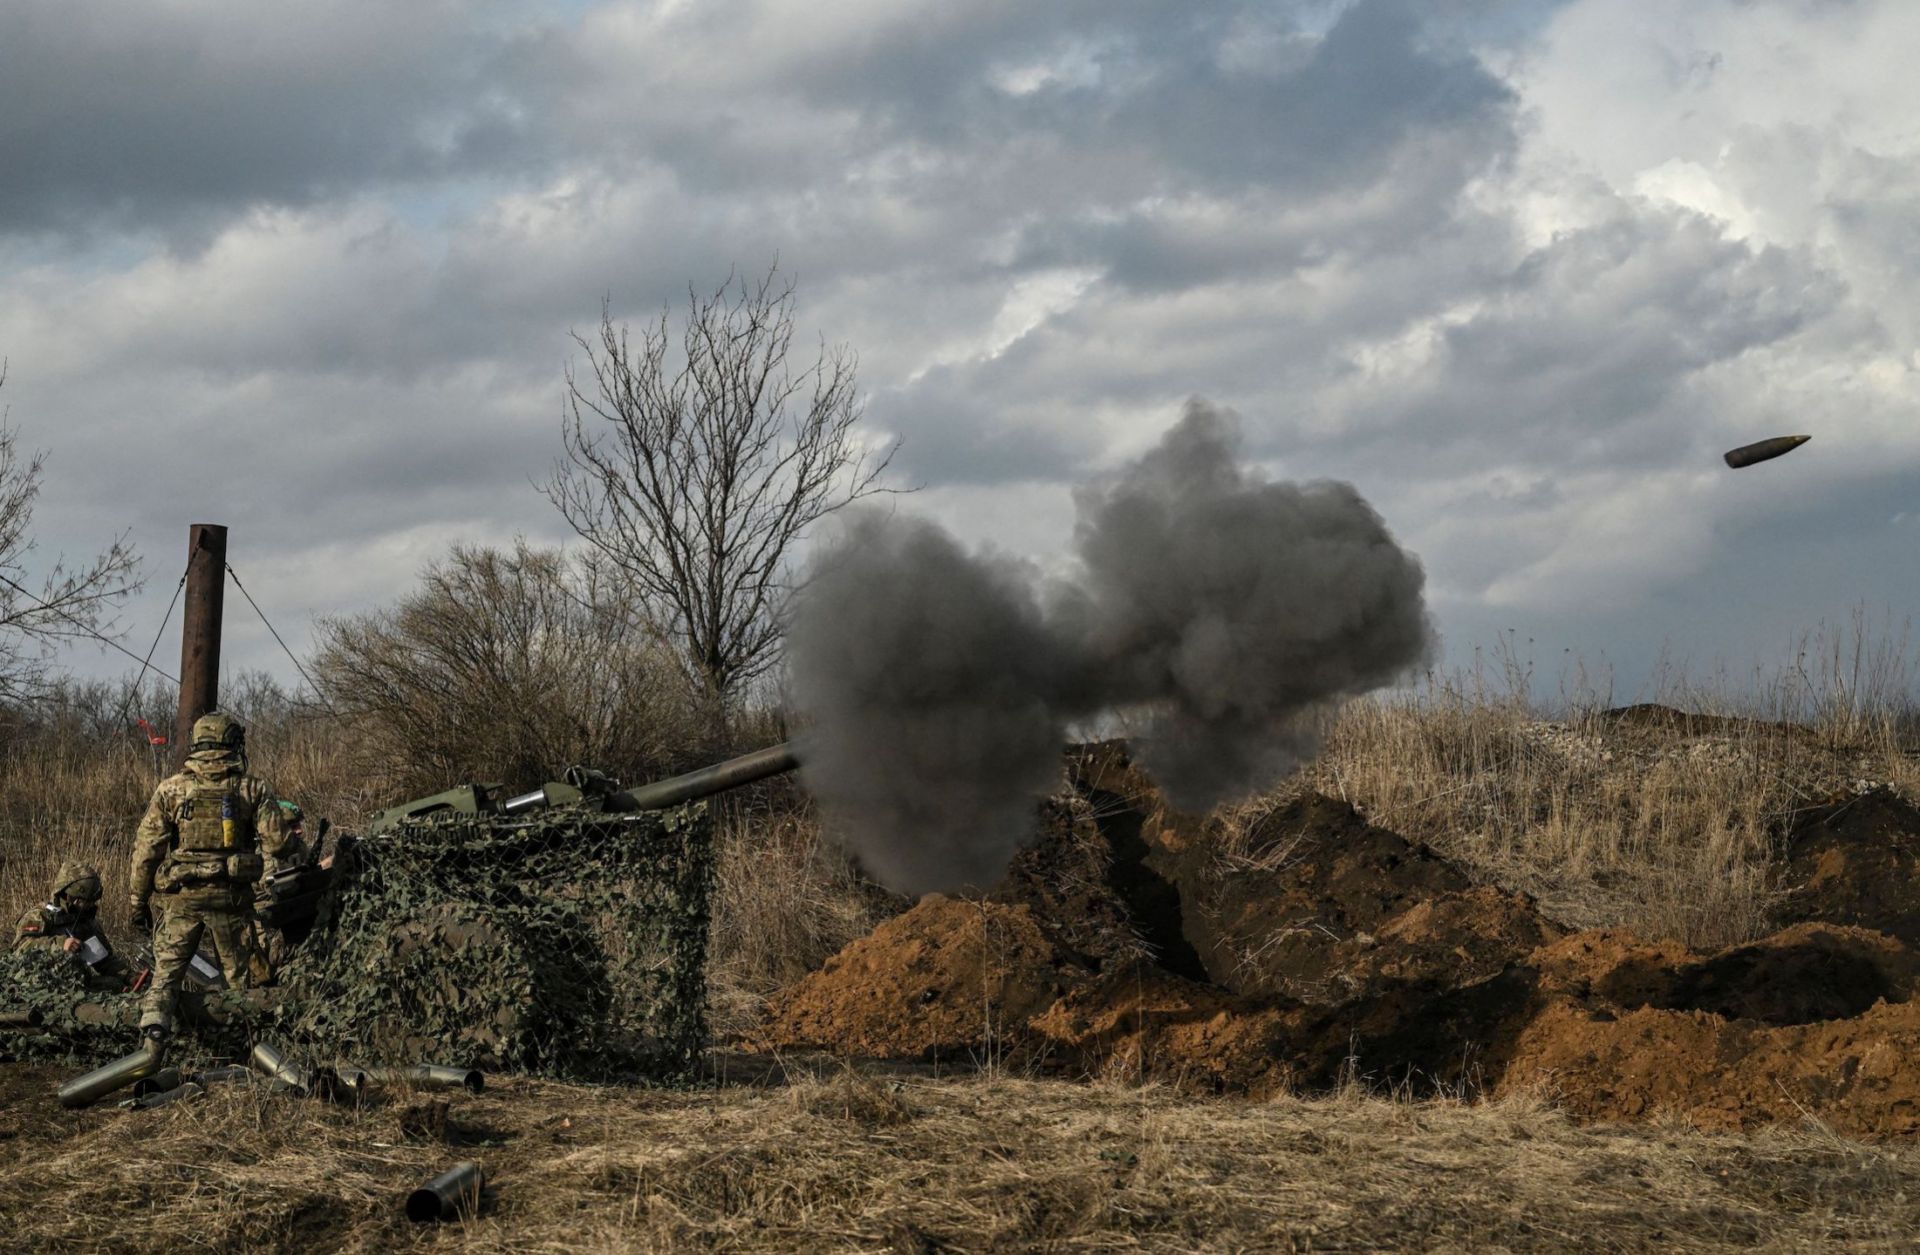 Ukrainian servicemen fire with a 105mm howitzer toward Russian positions near the city of Bakhmut on March 8, 2023, amid the Russian invasion of Ukraine.